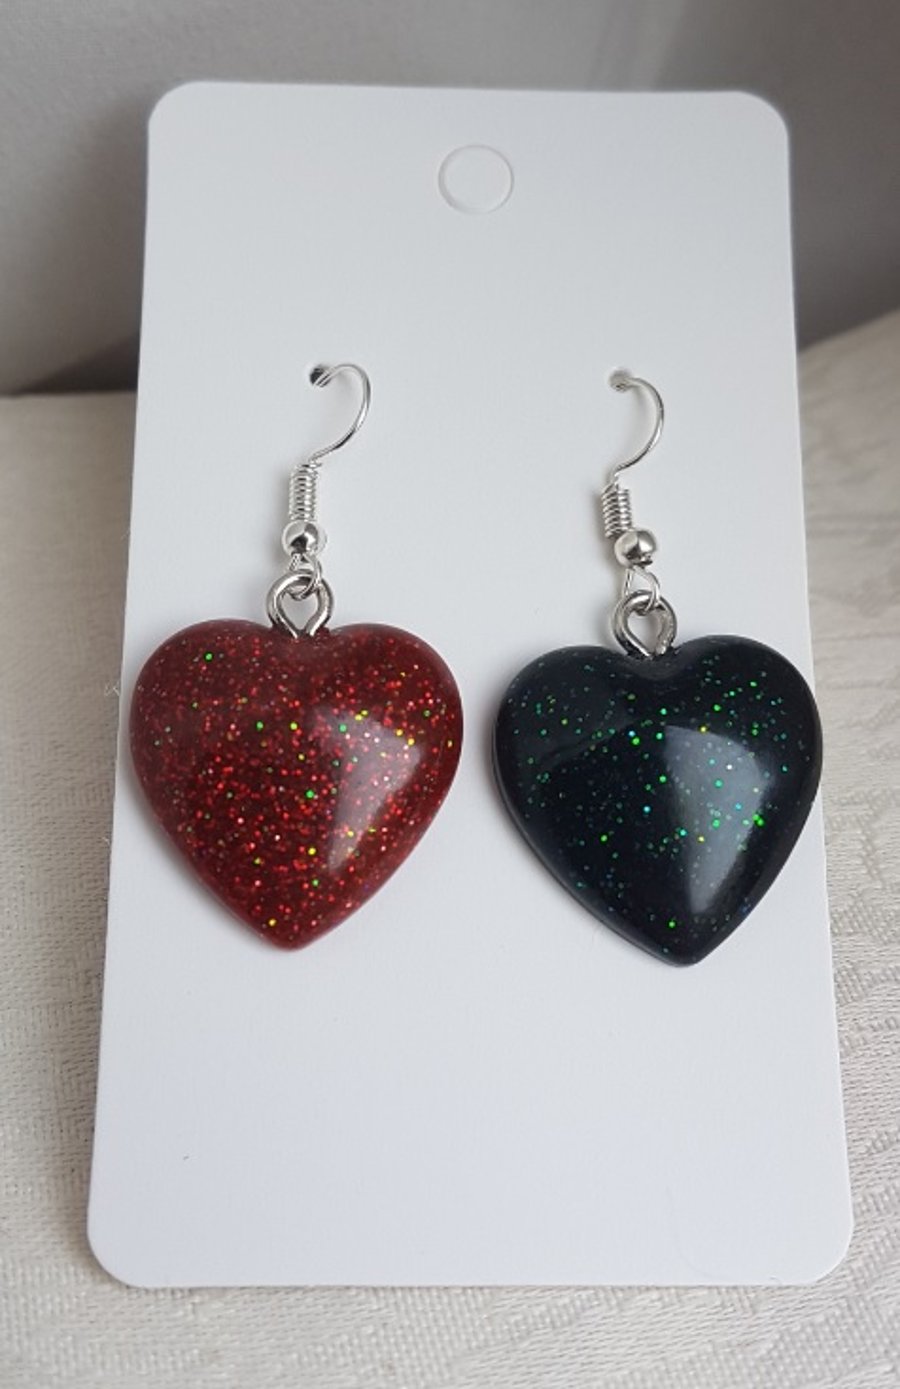 Gorgeous Red and Black Heart Earrings